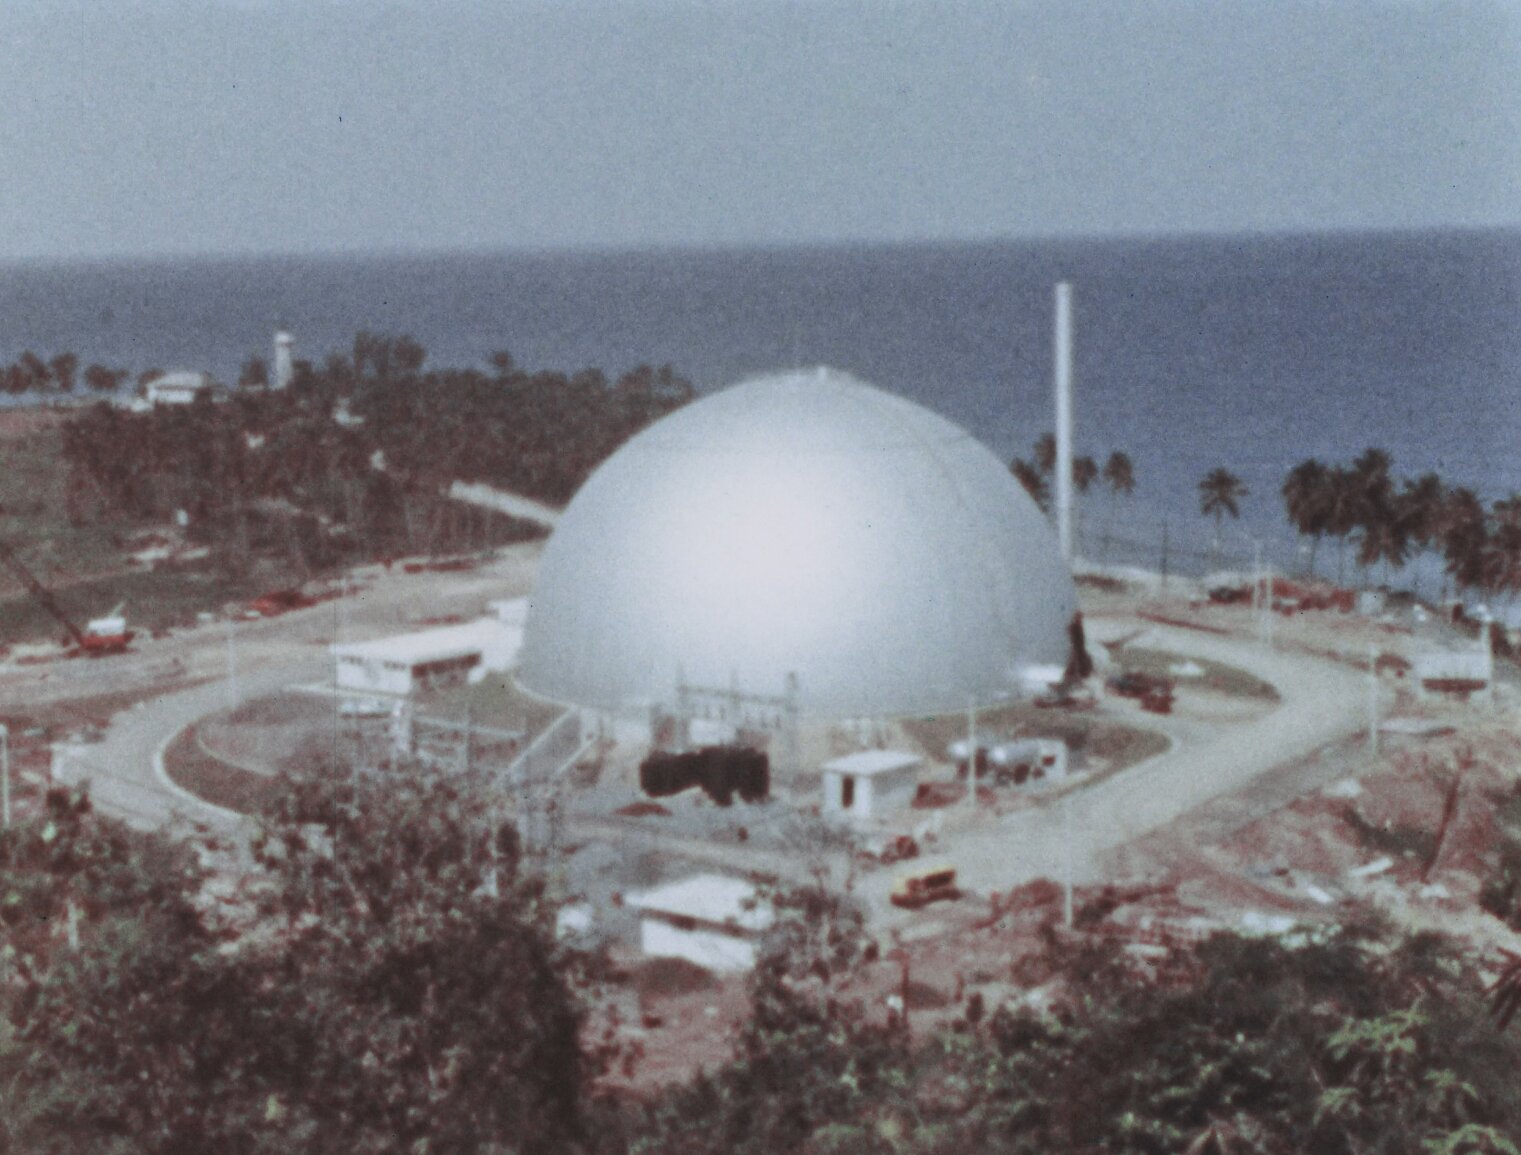 A completed view of the BONUS dome with ocean and palm trees in the background.